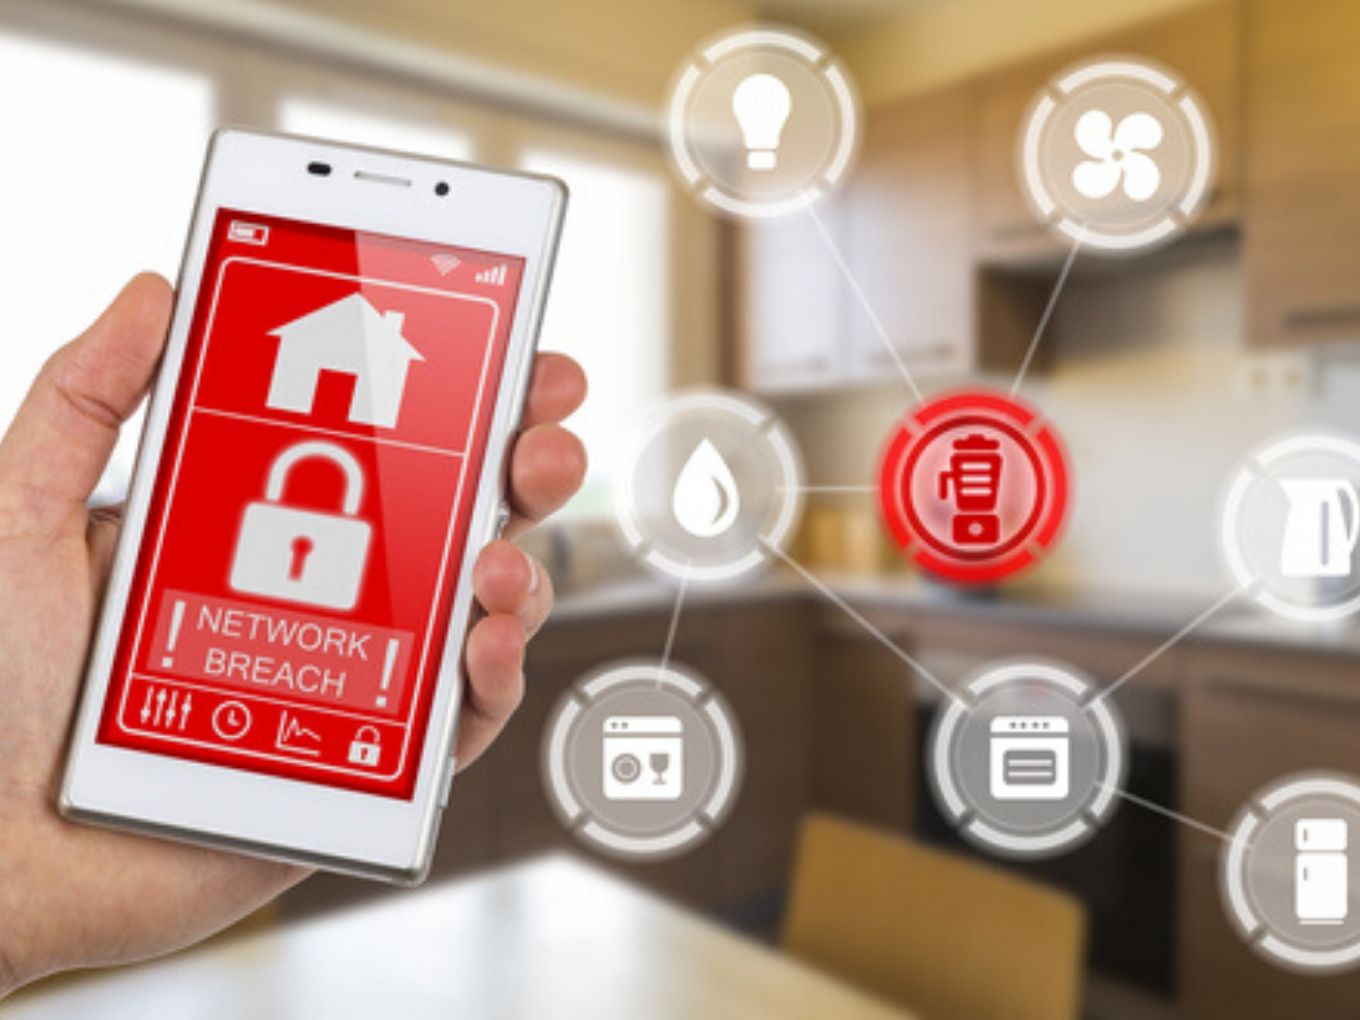 Hackers Can Steal Data Via IoT-Based Smart Lights, Here's How